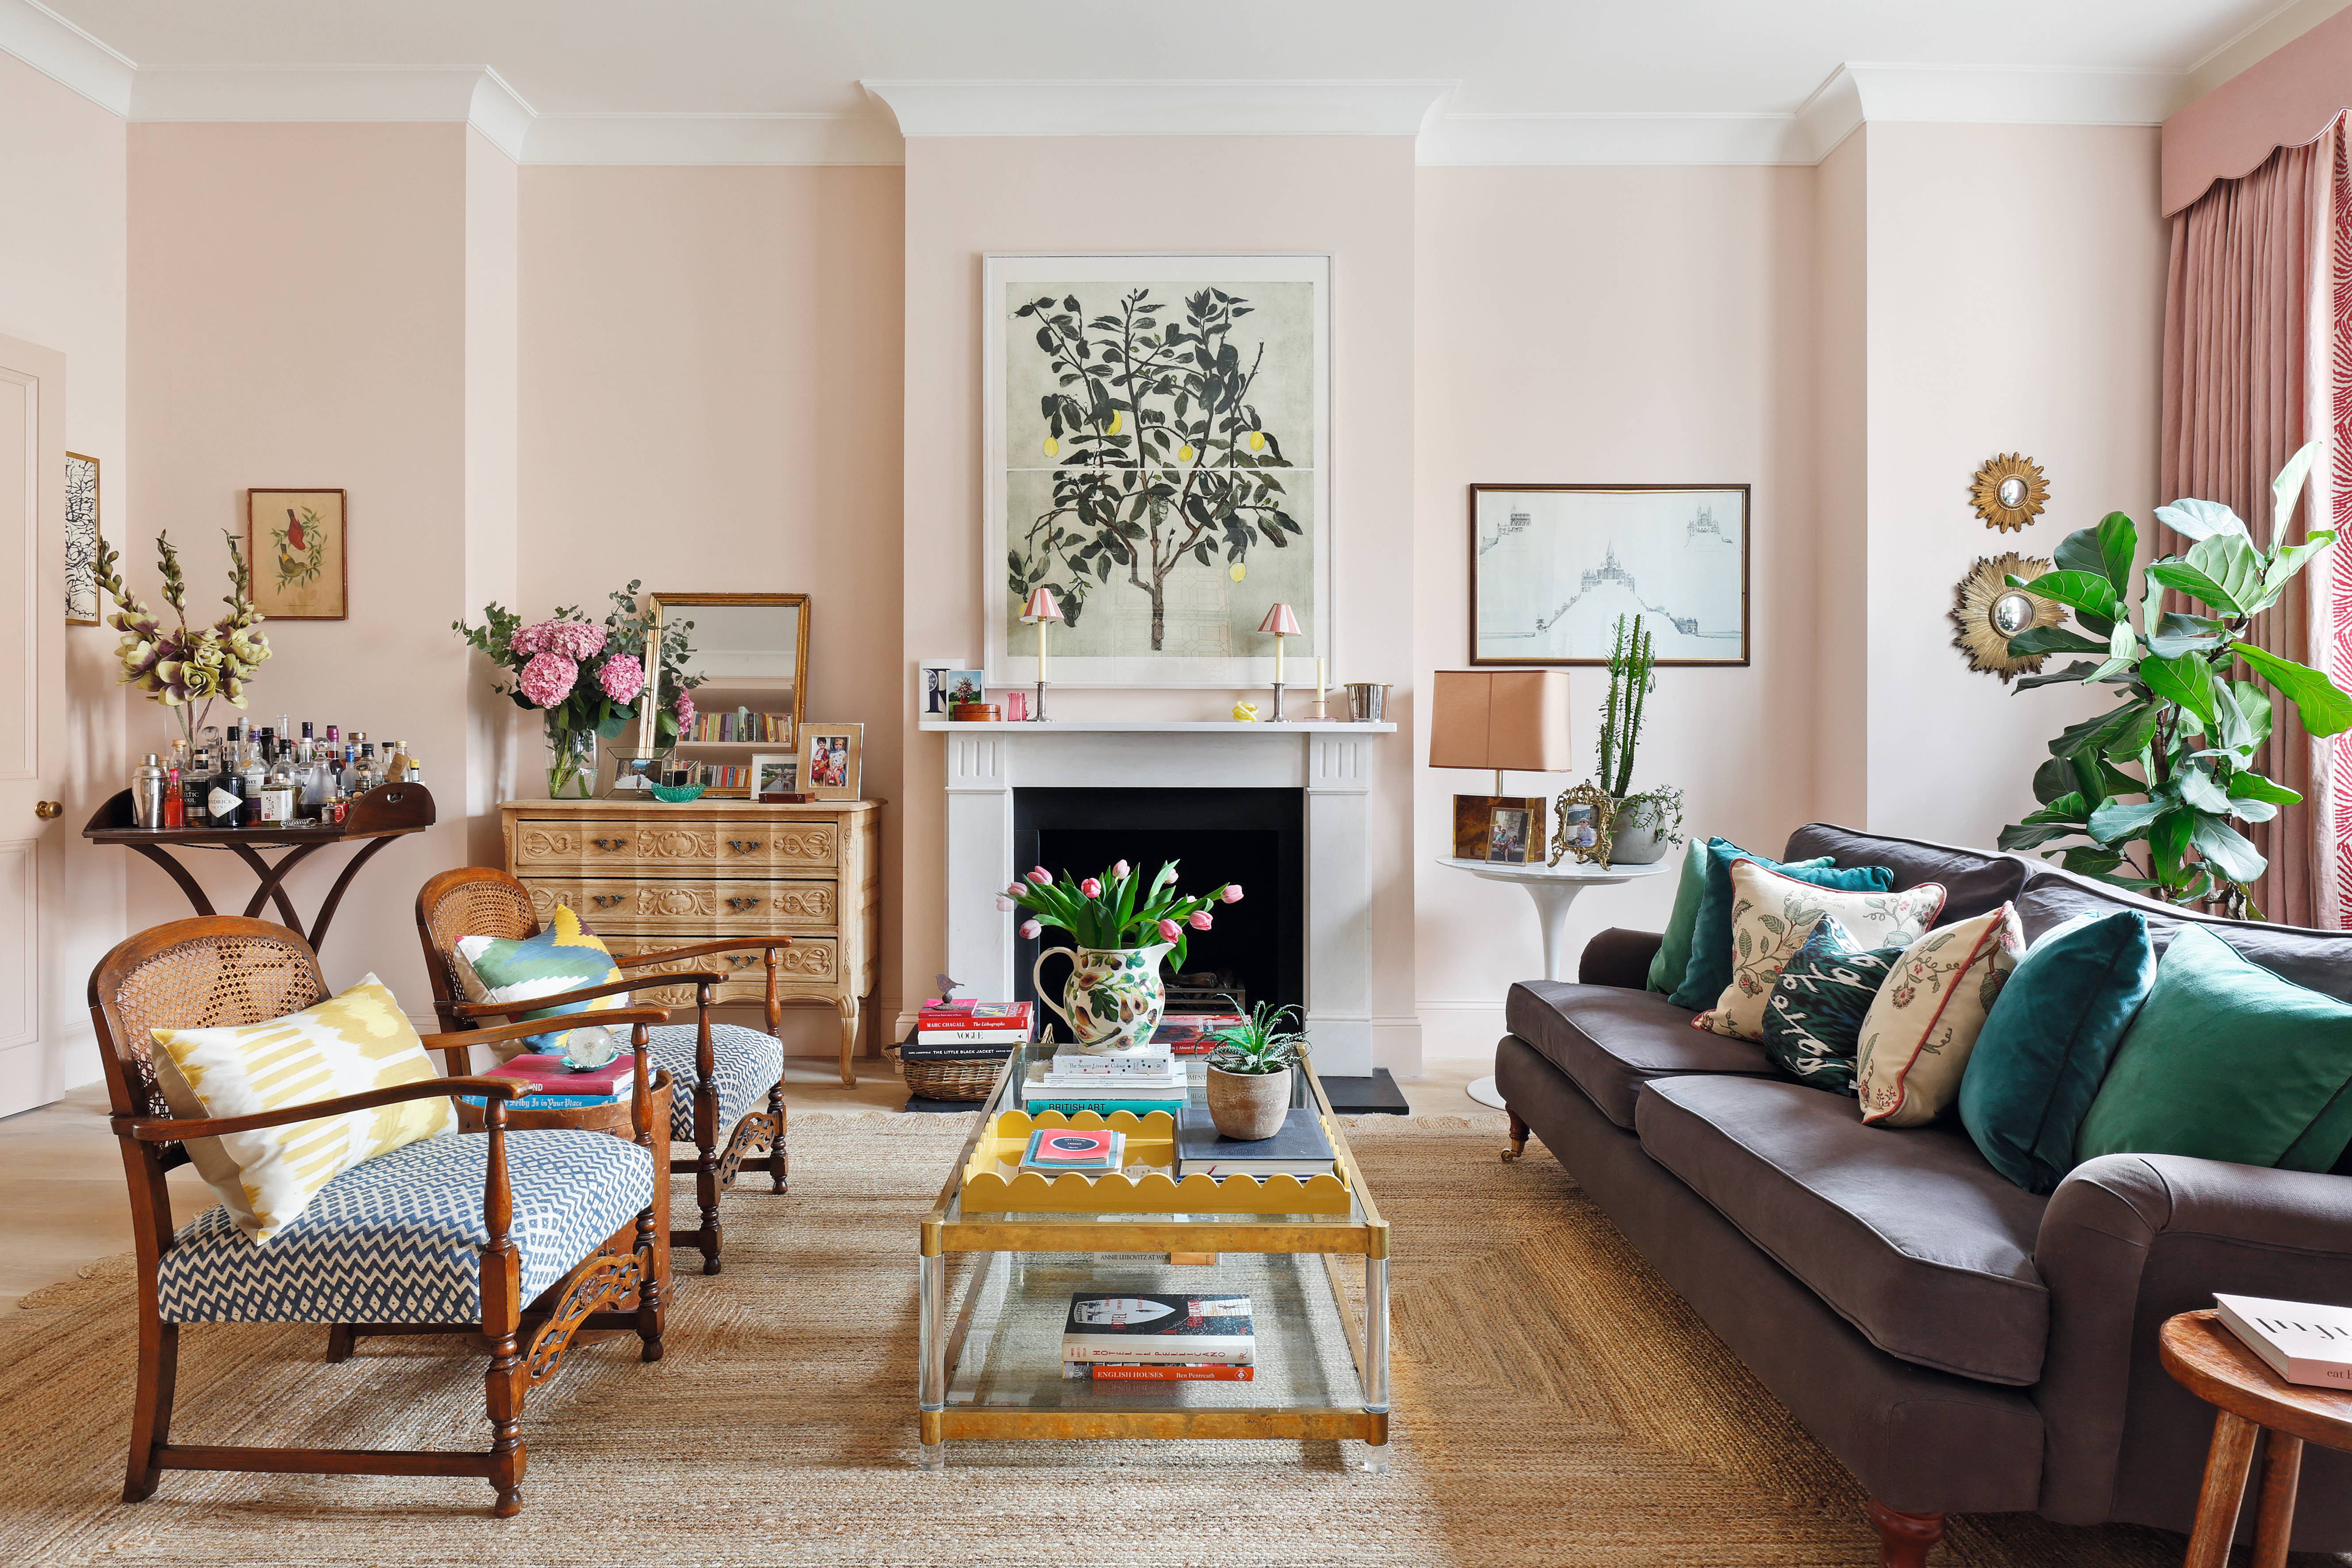 Pale pink living room with fireplace and grey couch